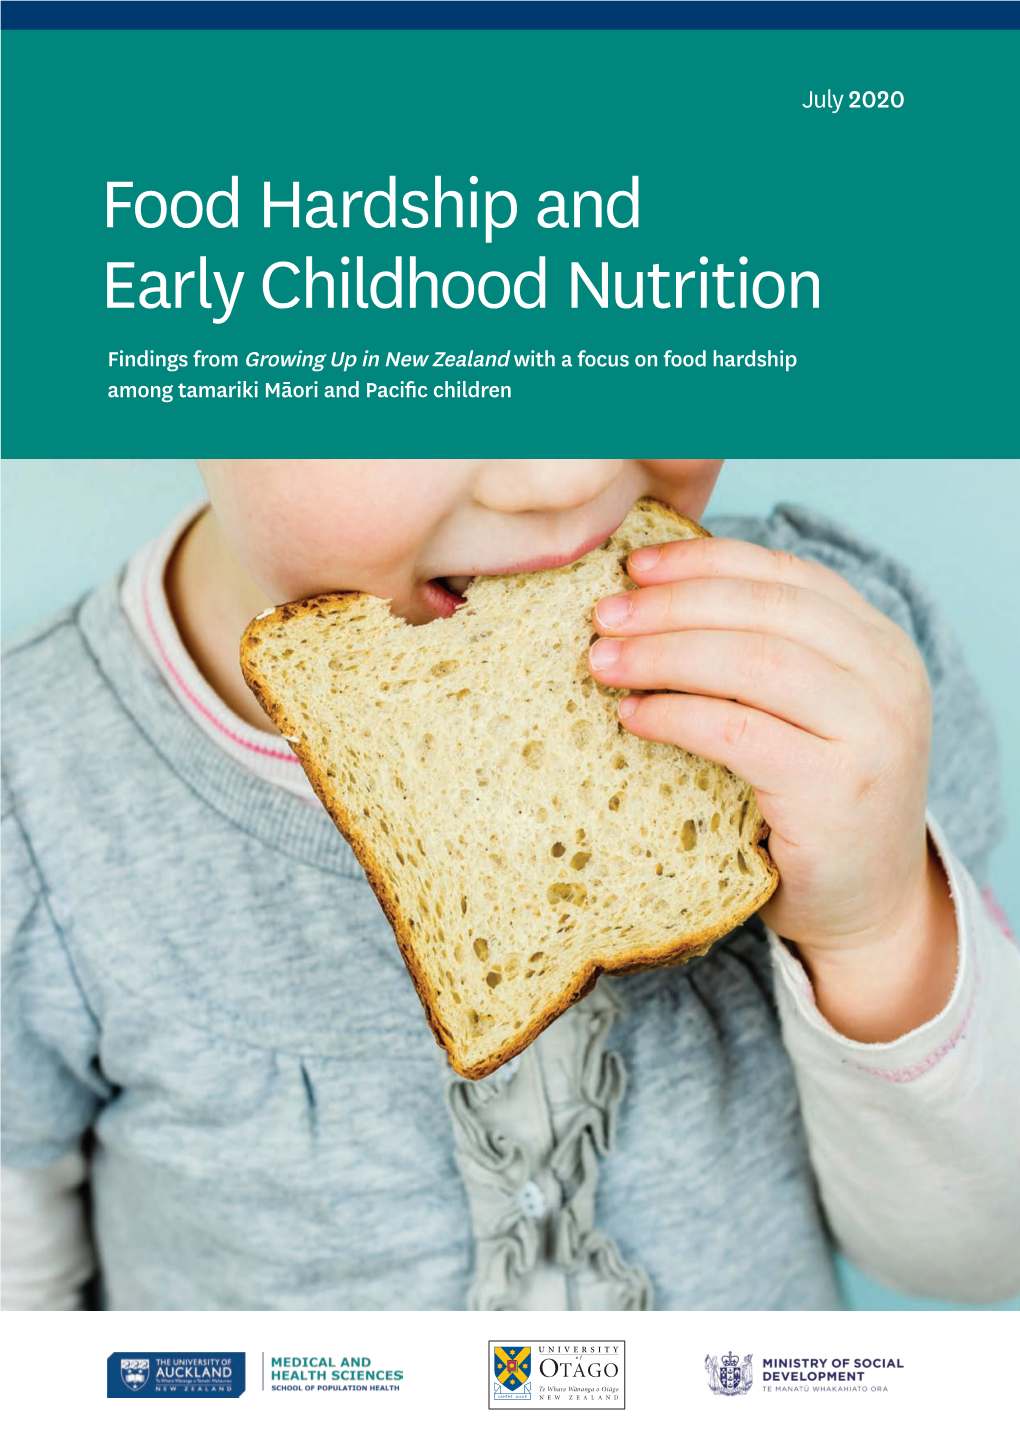 Food Hardship and Early Childhood Nutrition